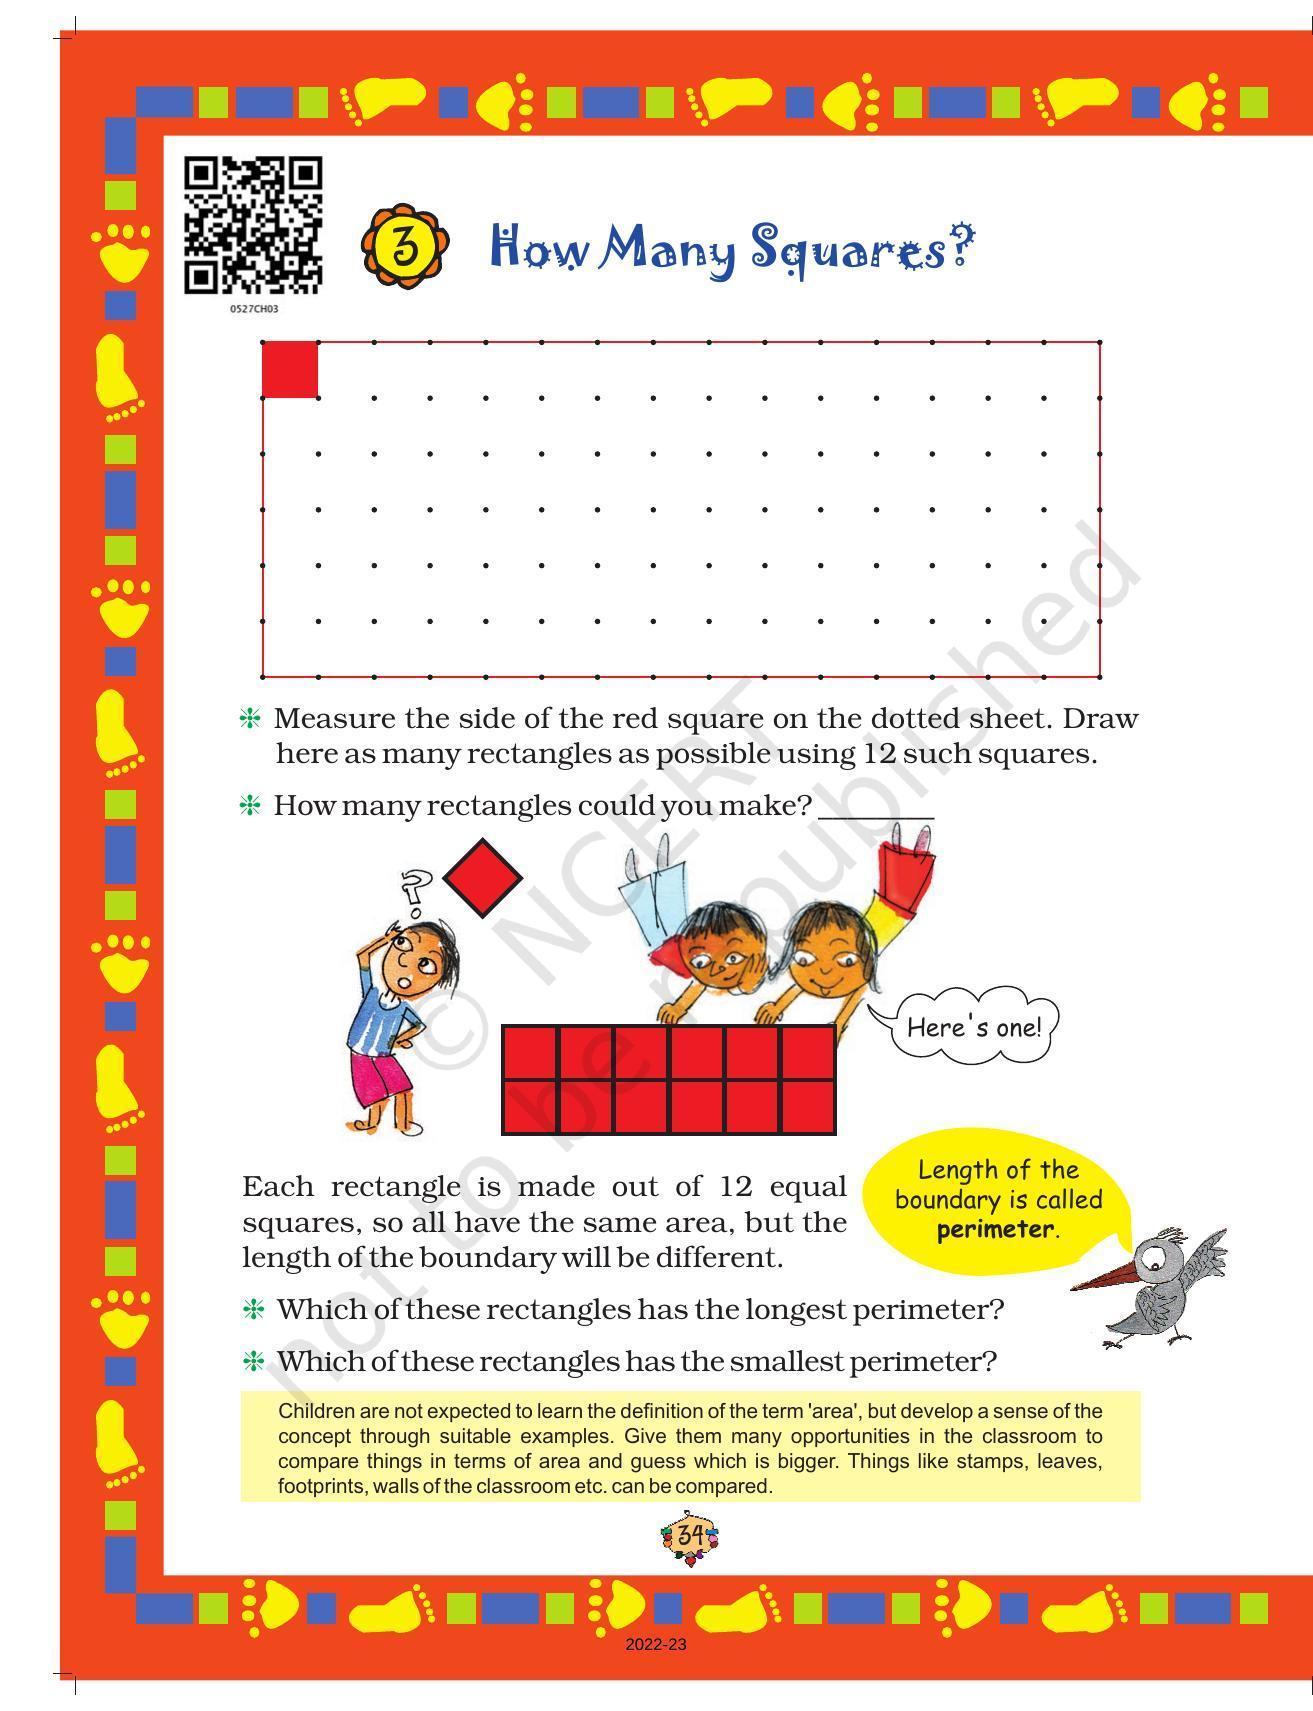 NCERT Book for Class 5 Maths Chapter 3 How Many Squares? - Page 1